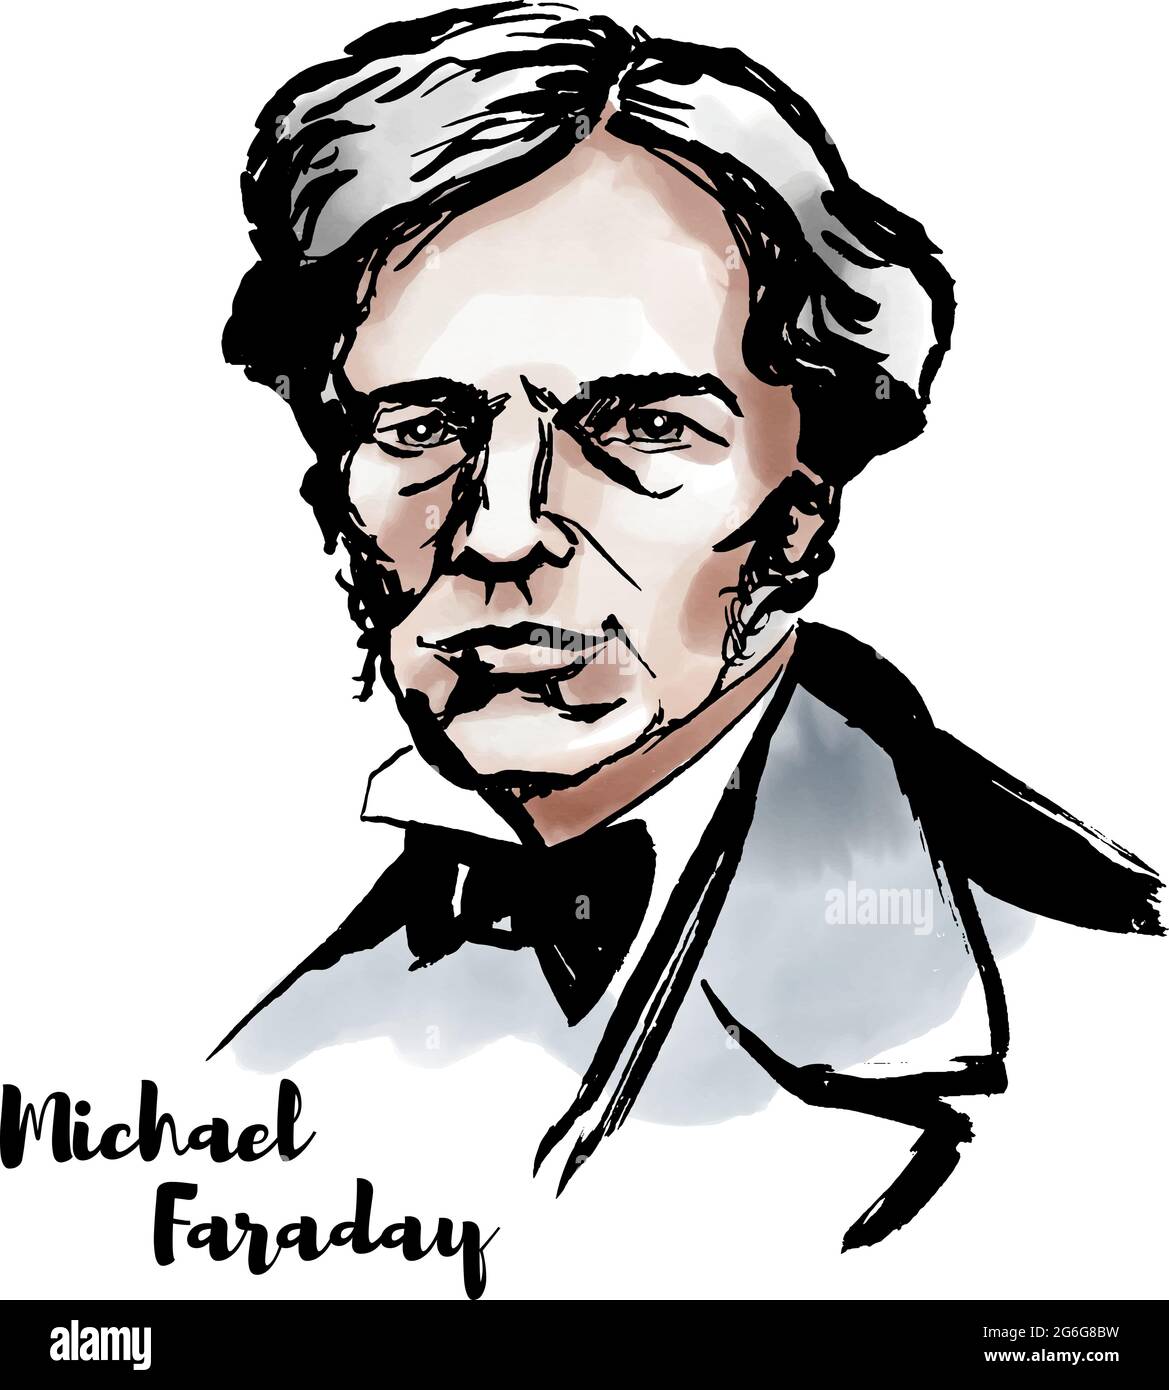 Michael Faraday watercolor vector portrait with ink contours. English scientist who contributed to the study of electromagnetism and electrochemistry. Stock Vector